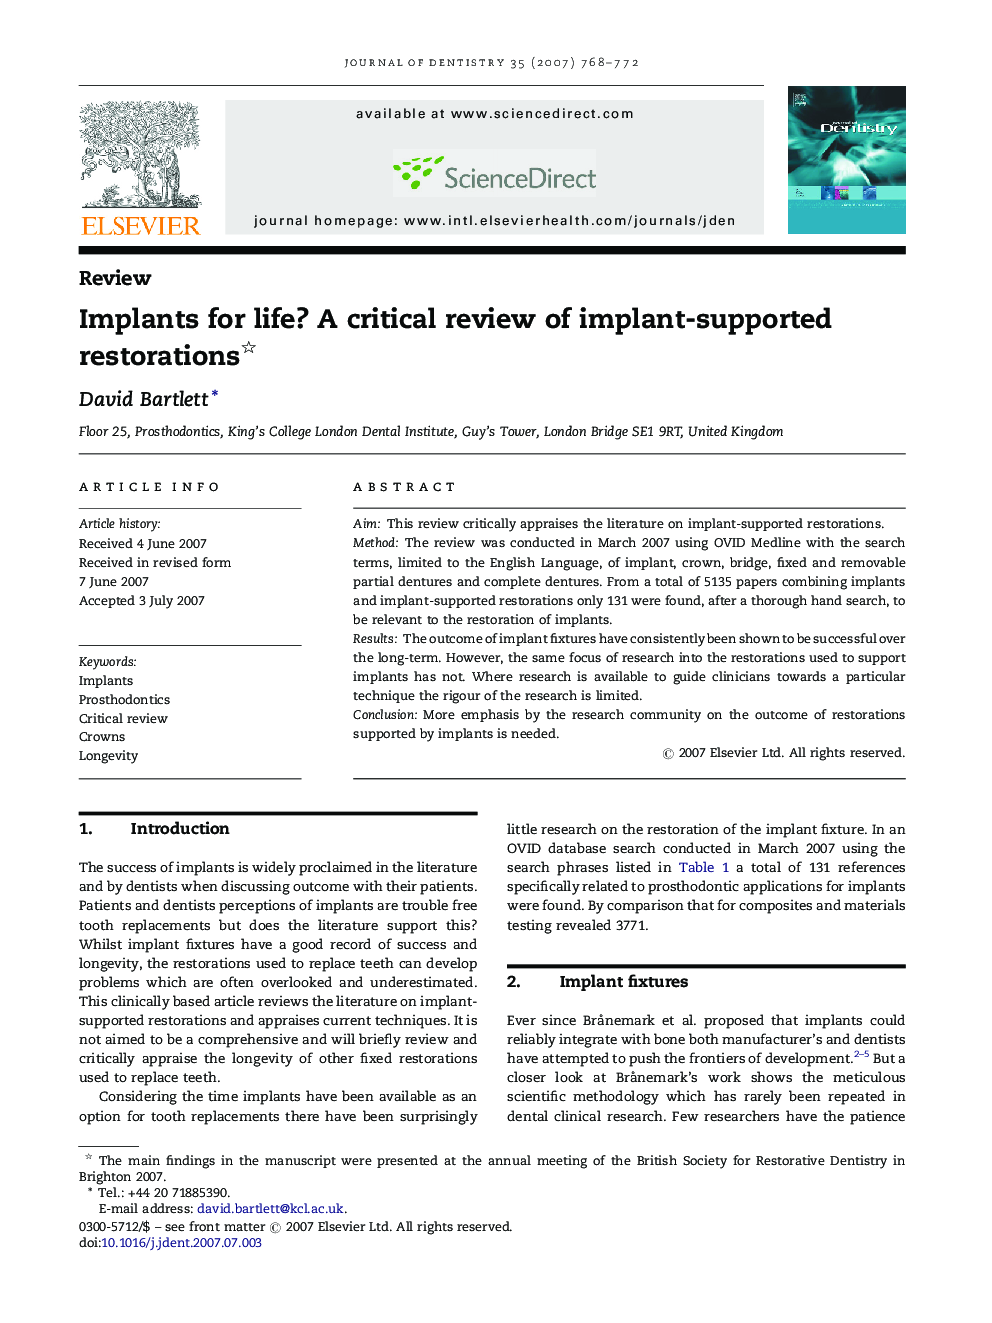 Implants for life? A critical review of implant-supported restorations 